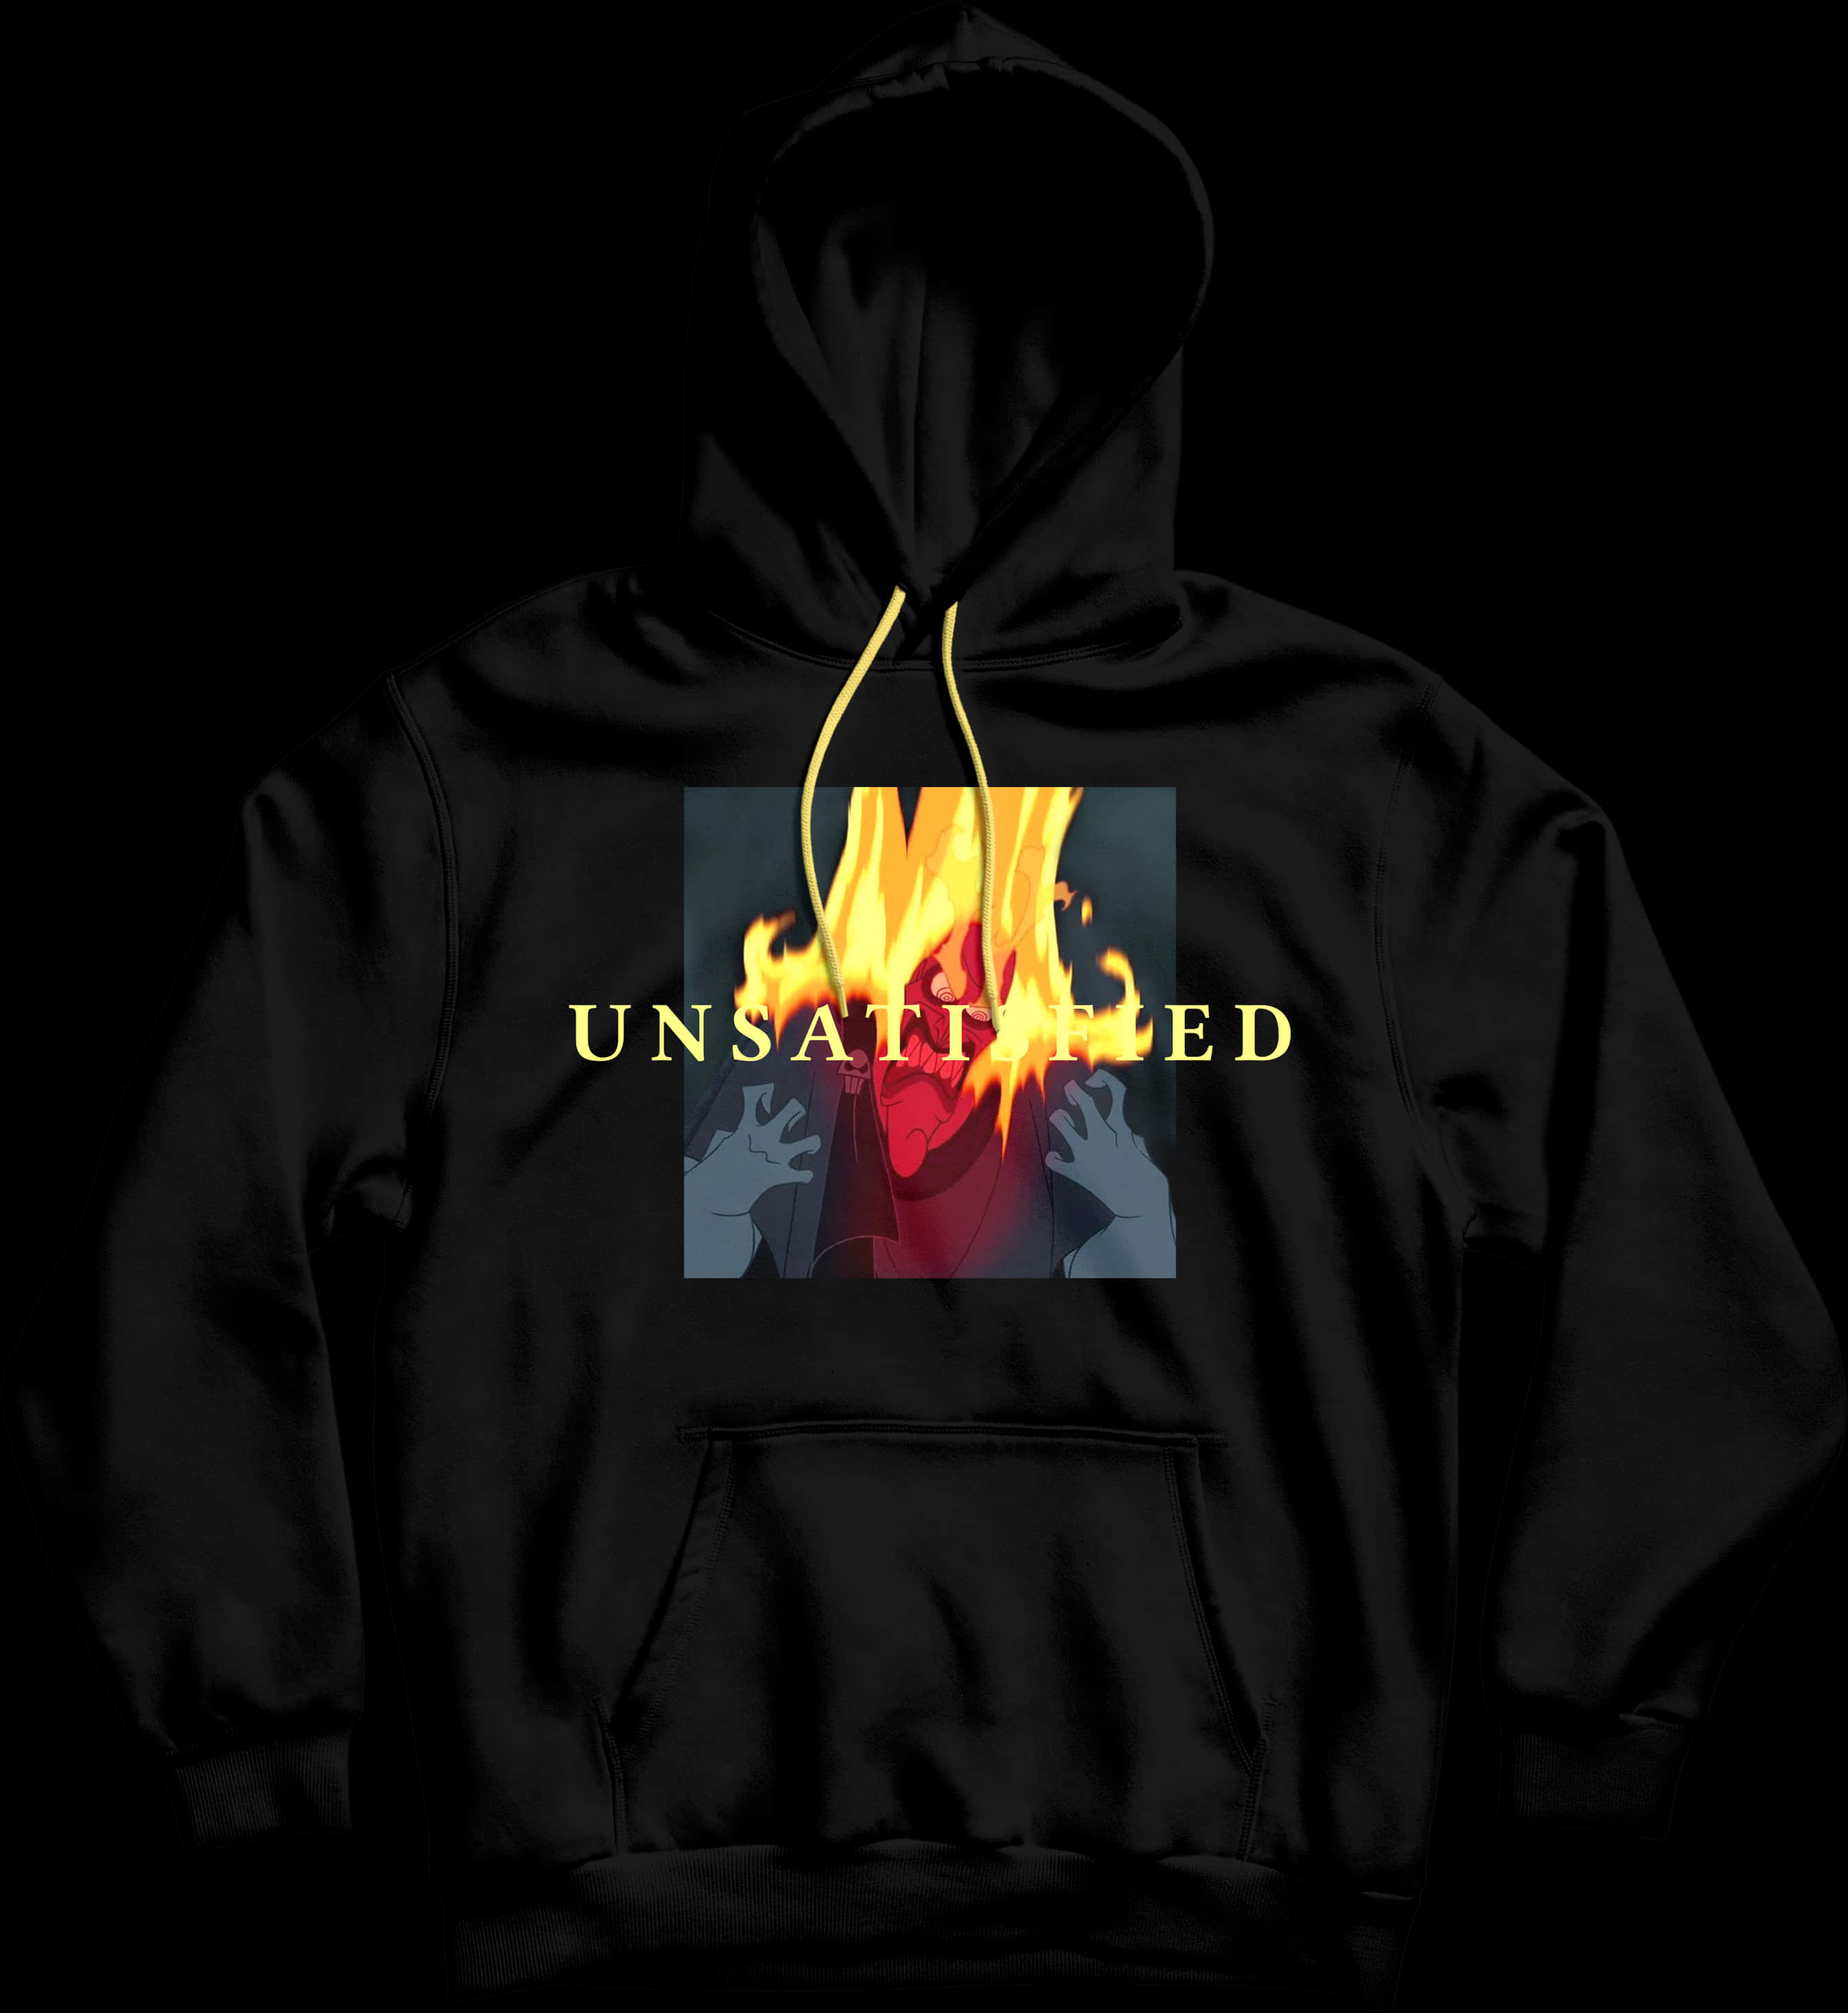 A Black Hoodie With A Logo On It